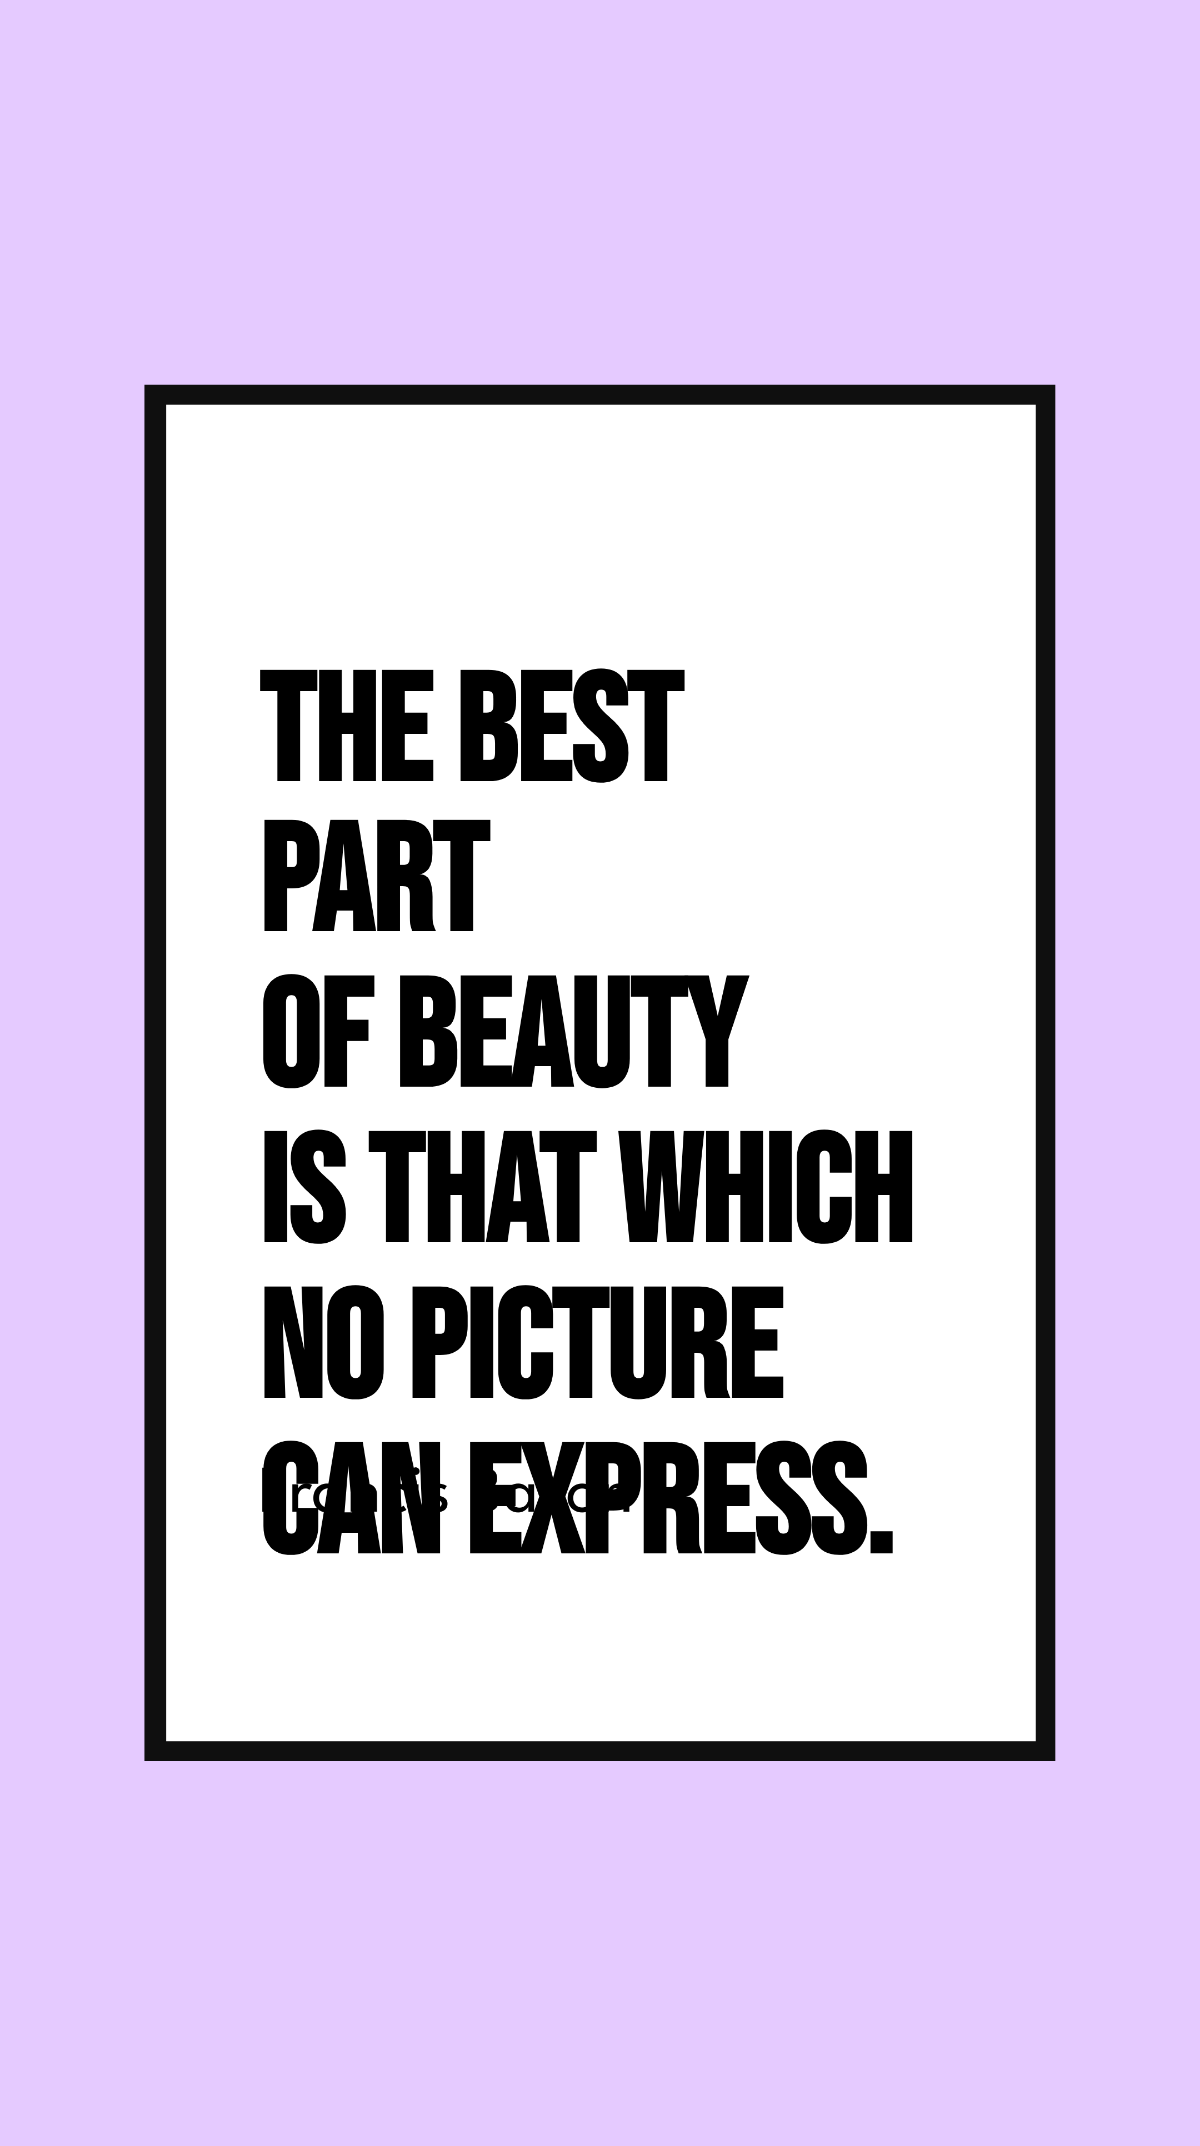 Francis Bacon - The best part of beauty is that which no picture can express.